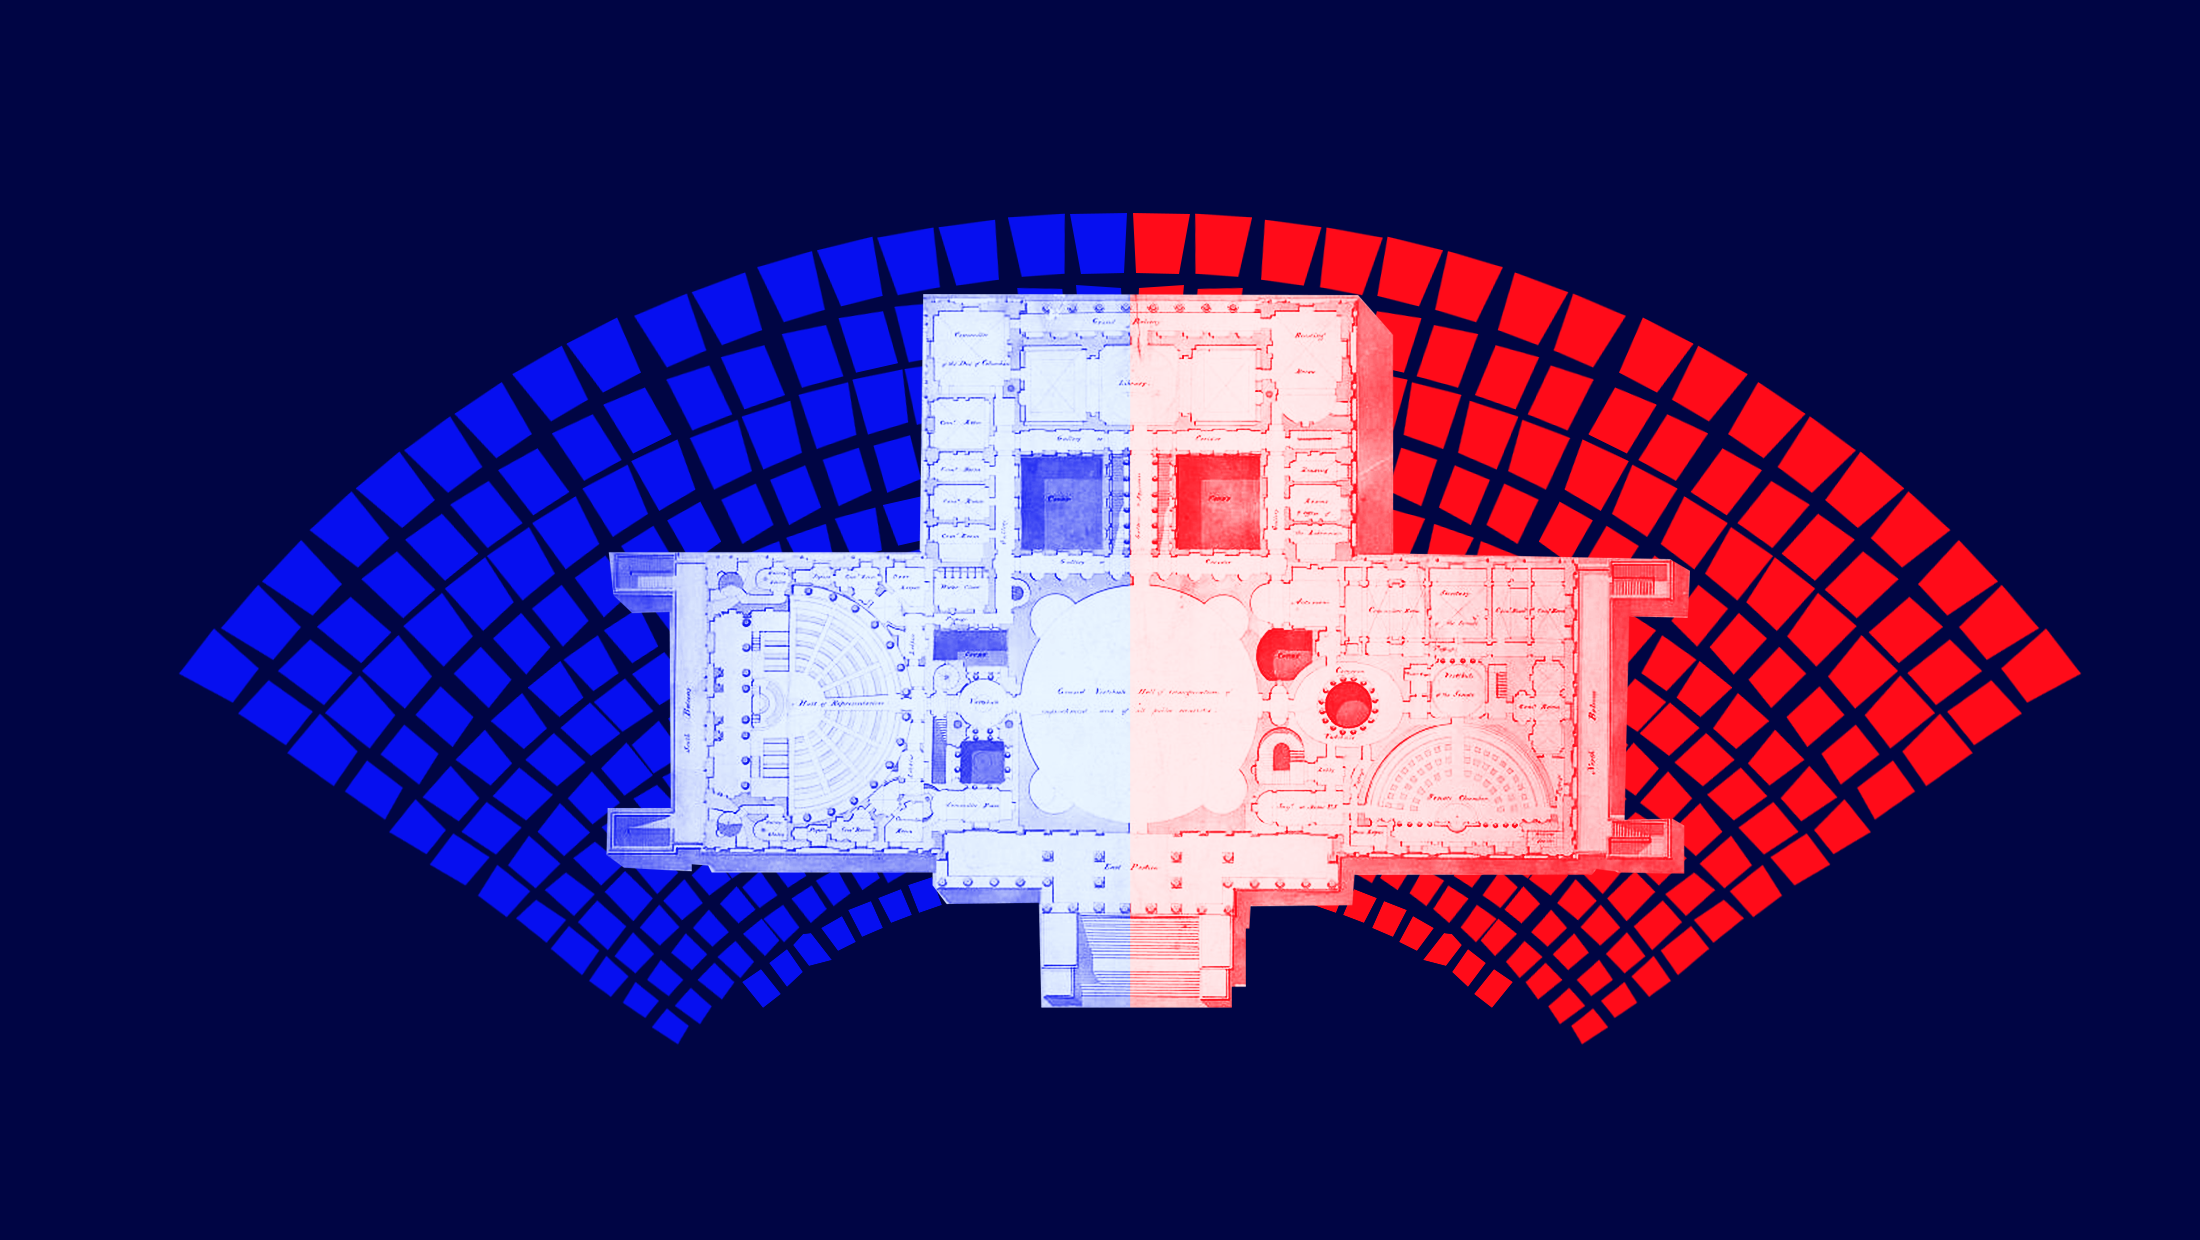 Blue background with overview image of Congress and blue seats to the left and red seats to the right.